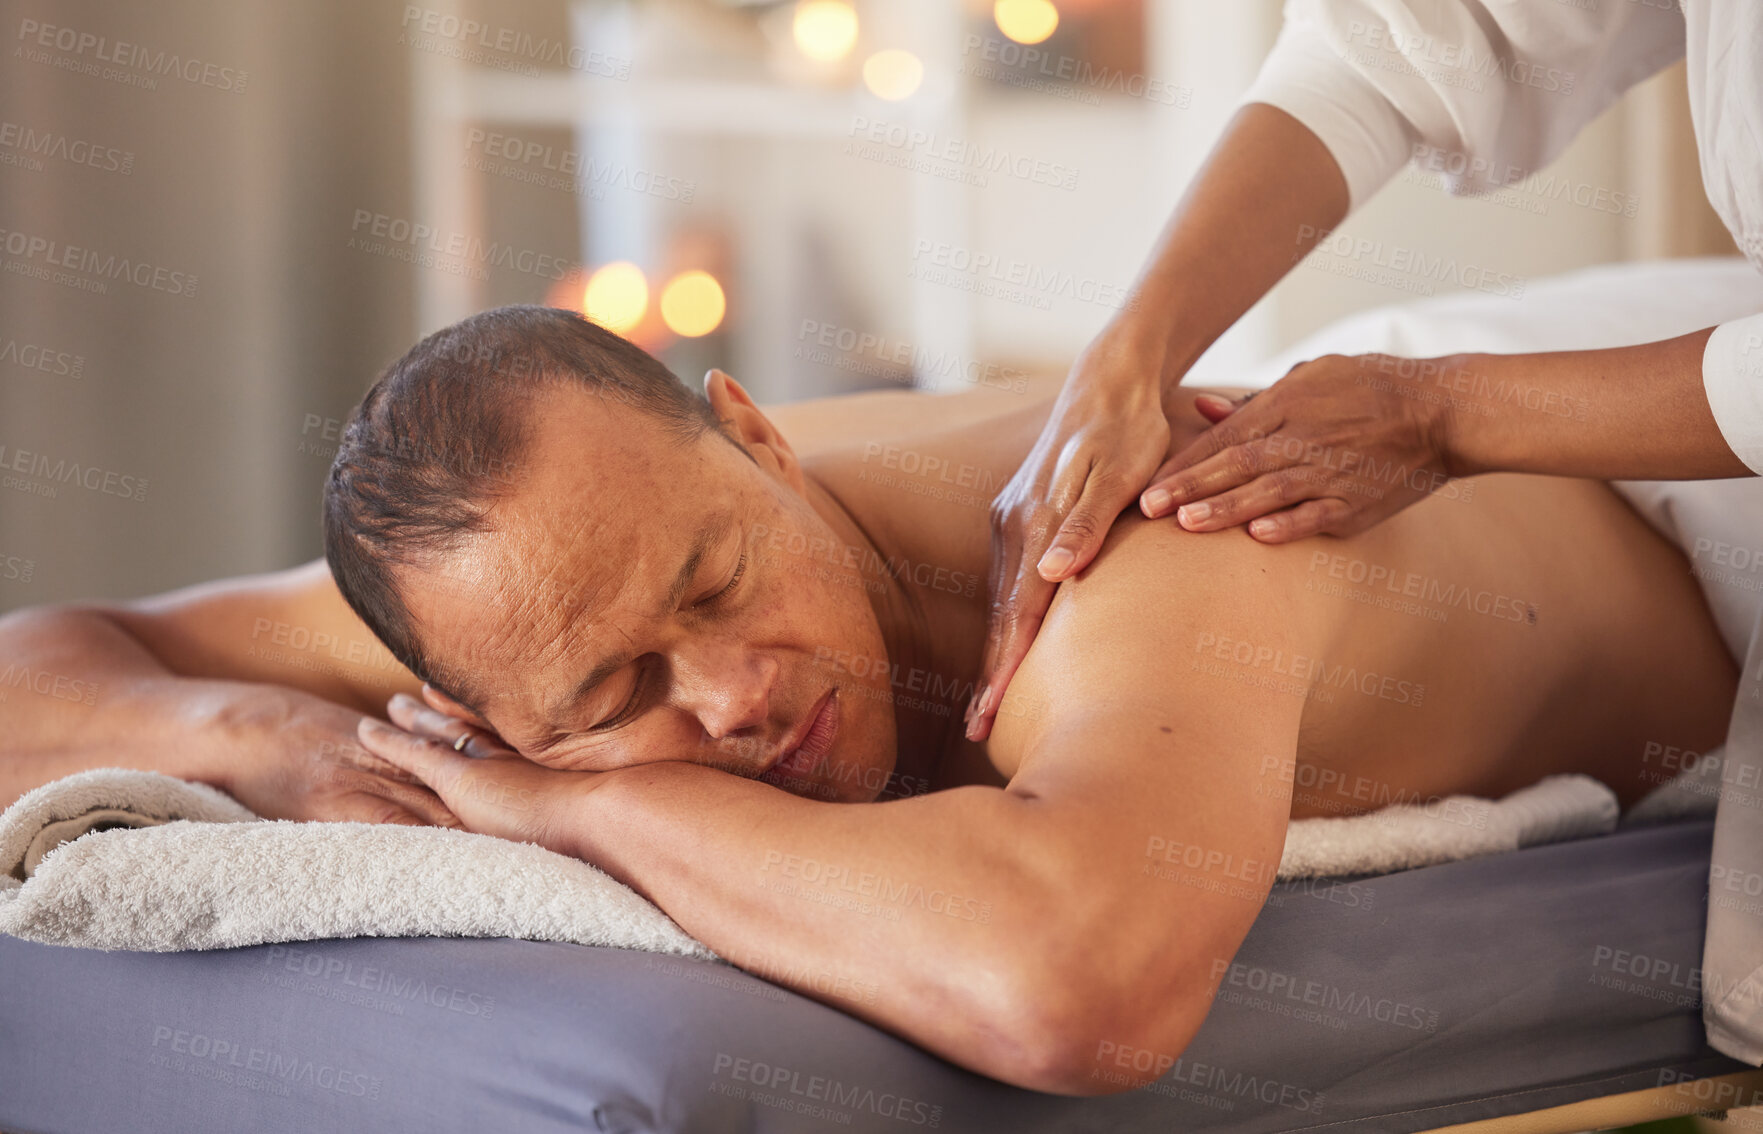 Buy stock photo Spa, relax and hands massage man for health, wellness and stress relief at luxury resort. Zen, physical therapy and female therapist massaging back and arm of male for physiotherapy and body care.